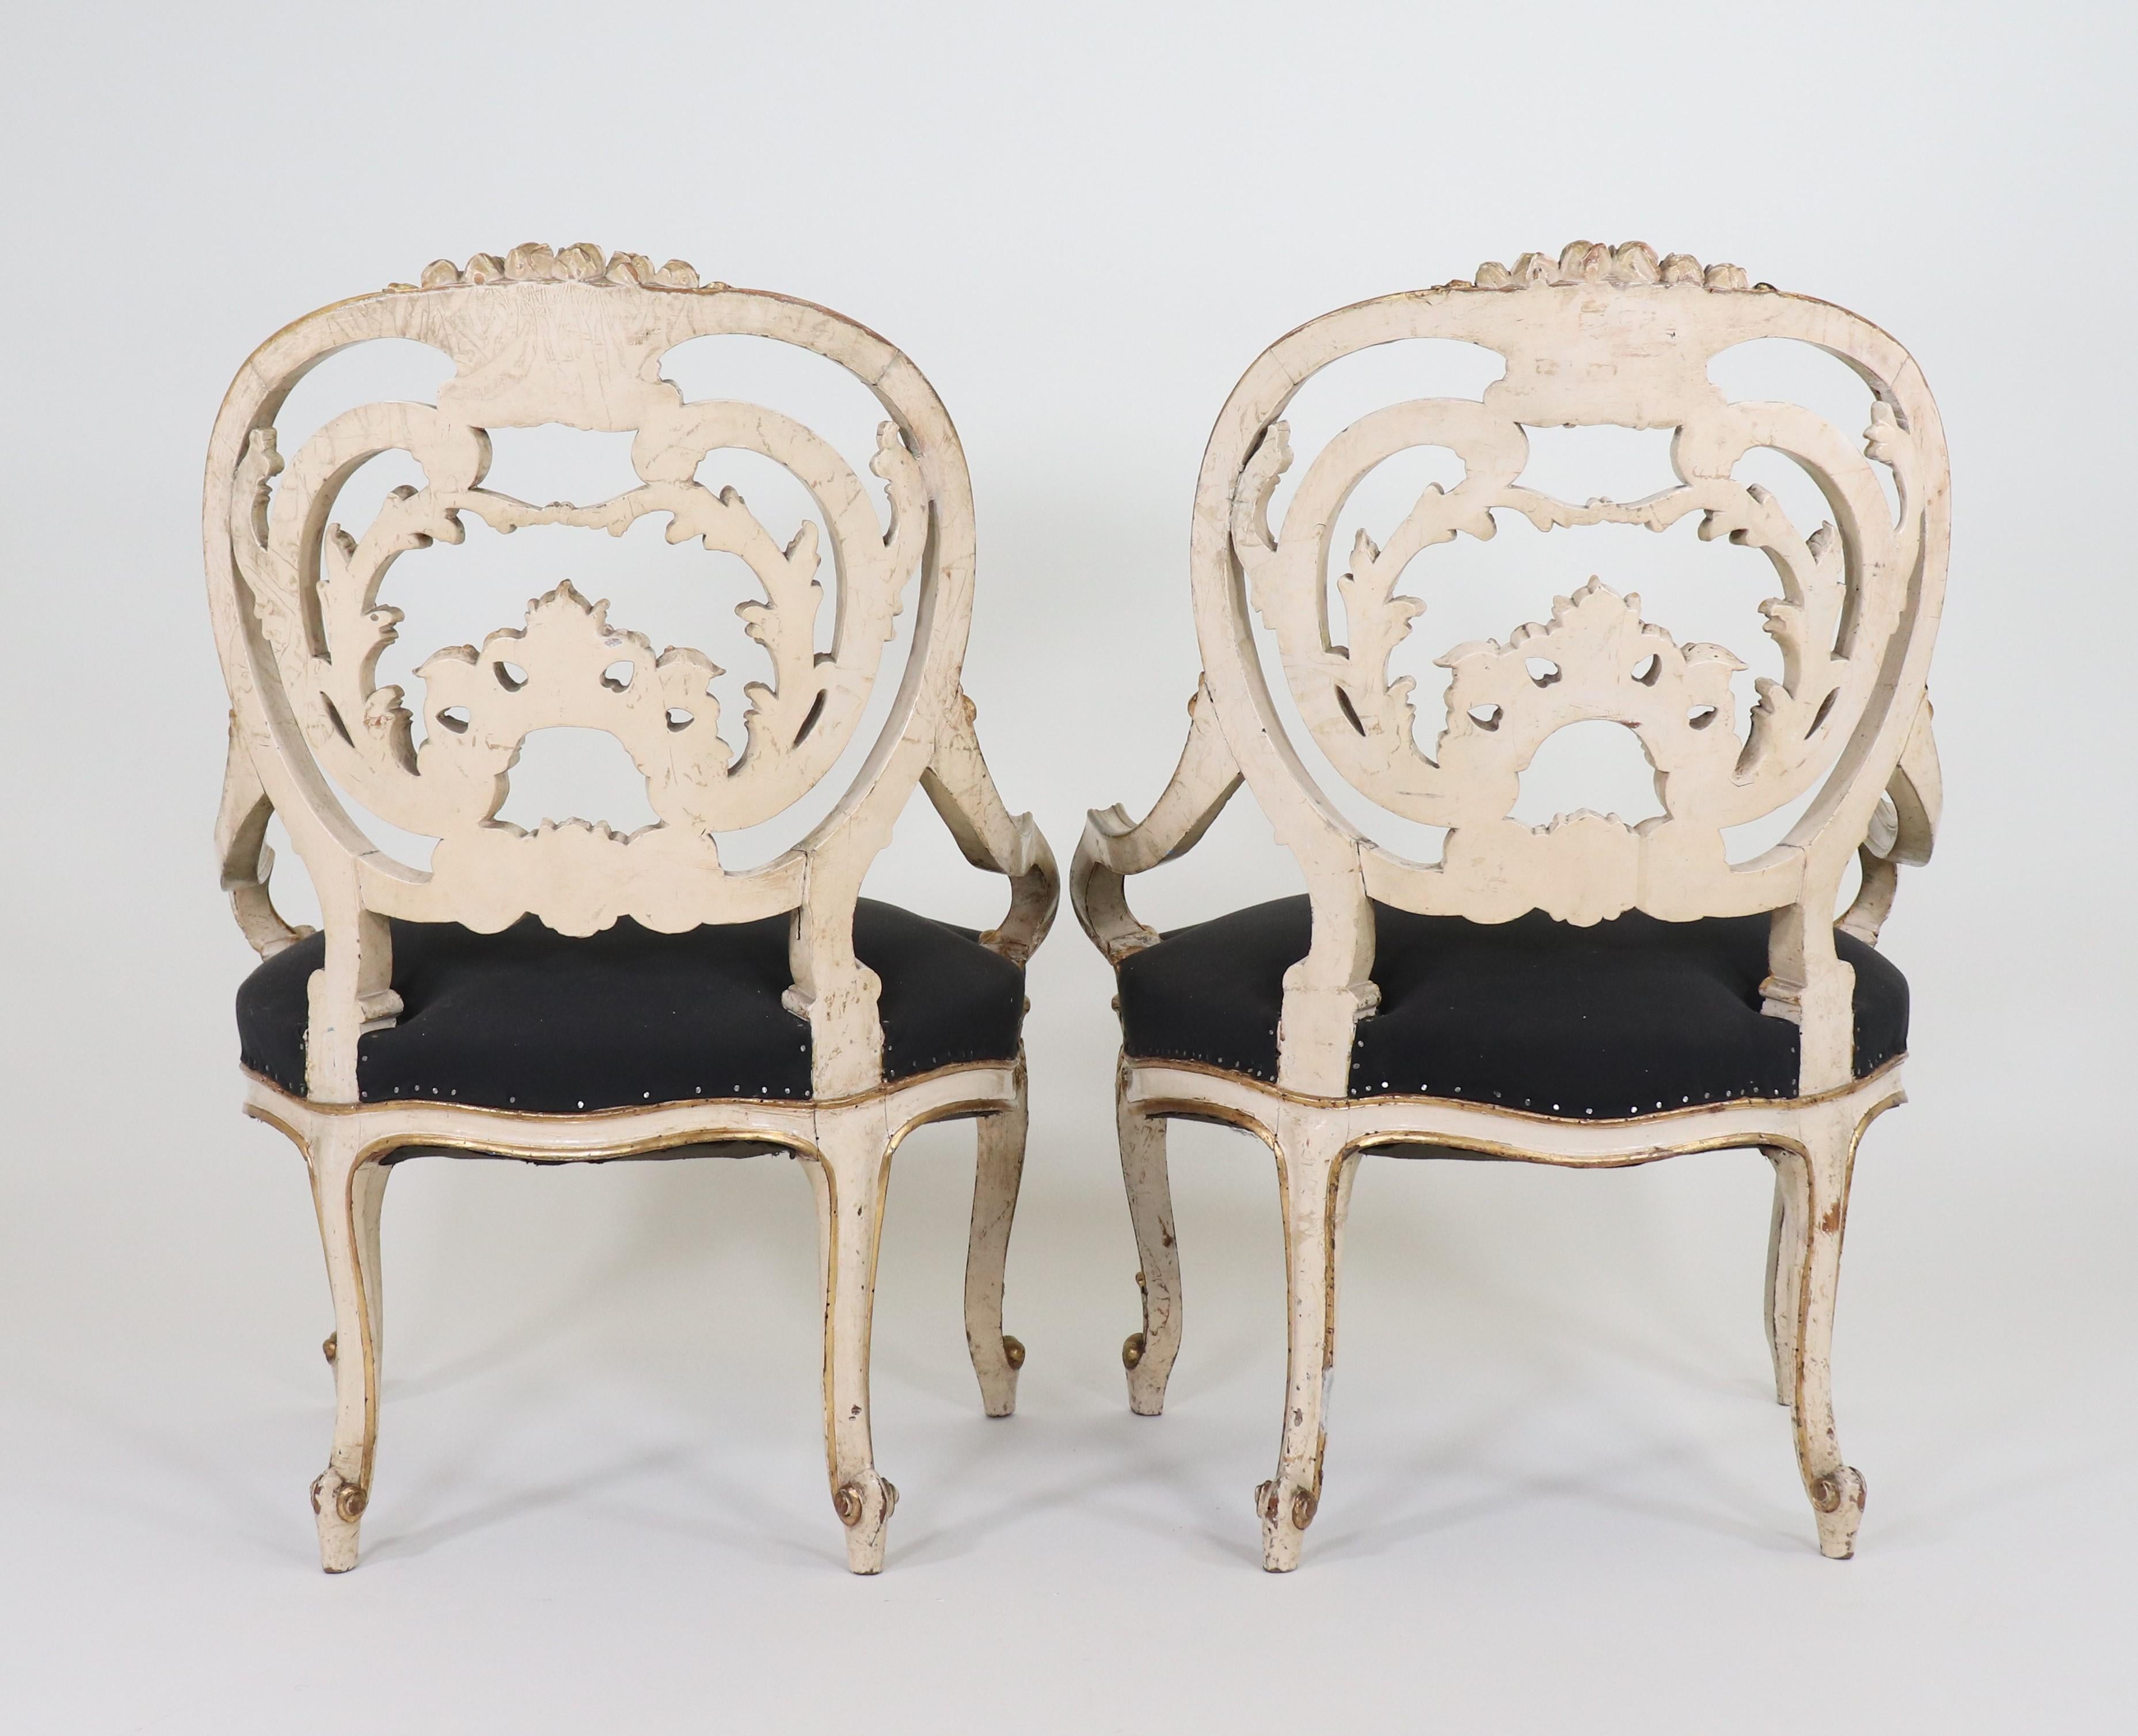 Pair of Early 19th Century Louis XIV Style Fauteuil Armchairs by Maison Jansen For Sale 3